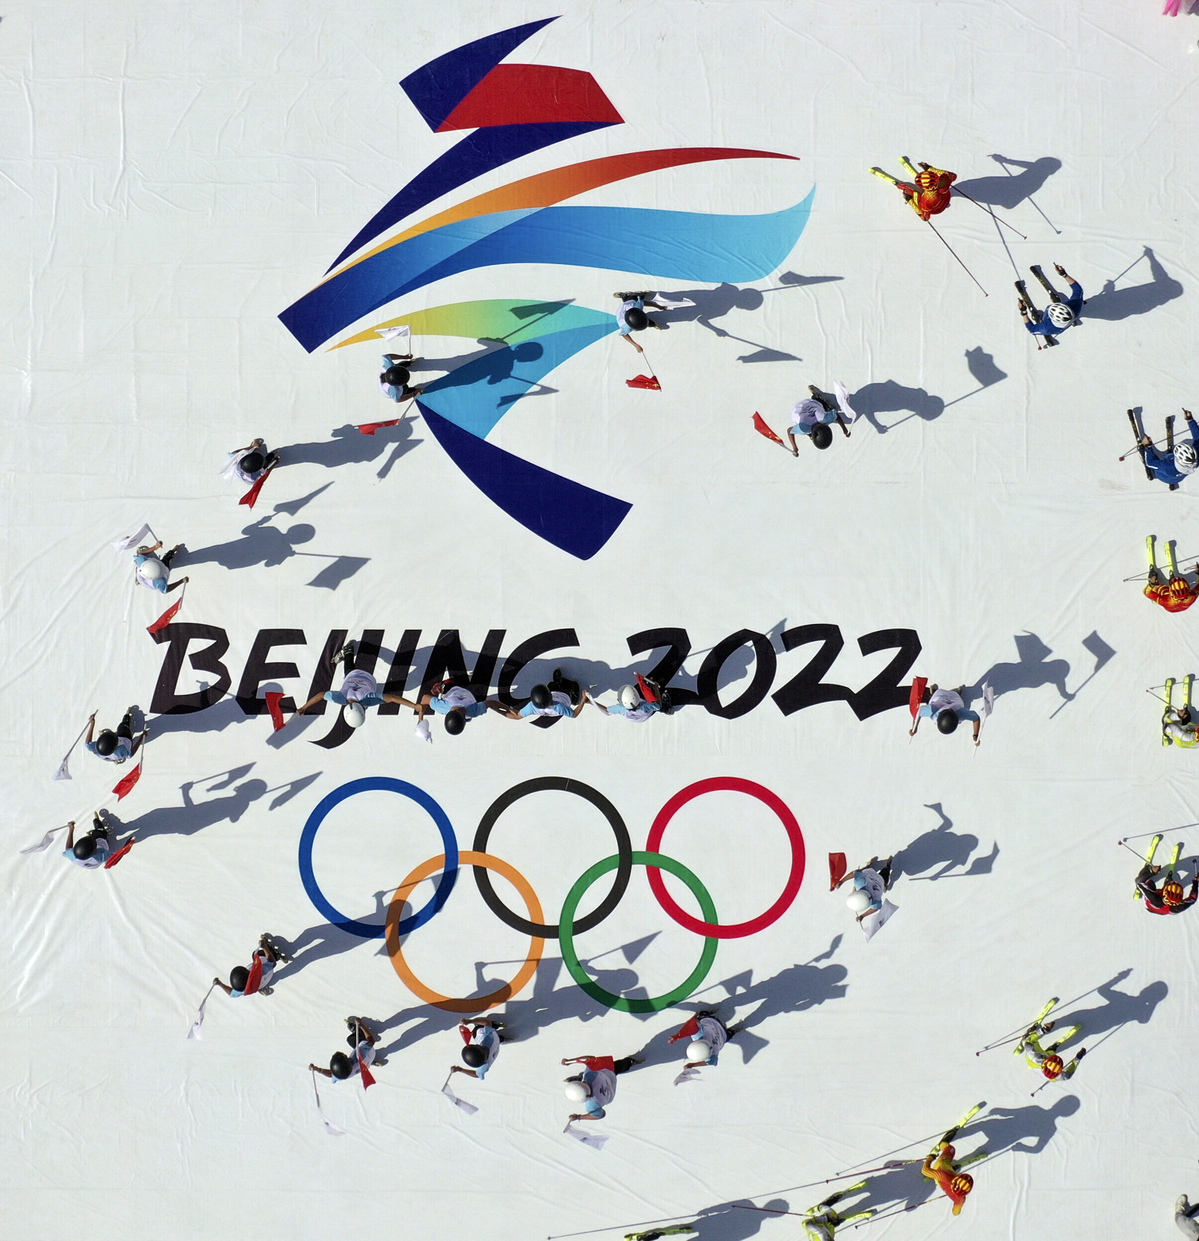 Beijing adds two new suppliers to 2022 Winter Olympics